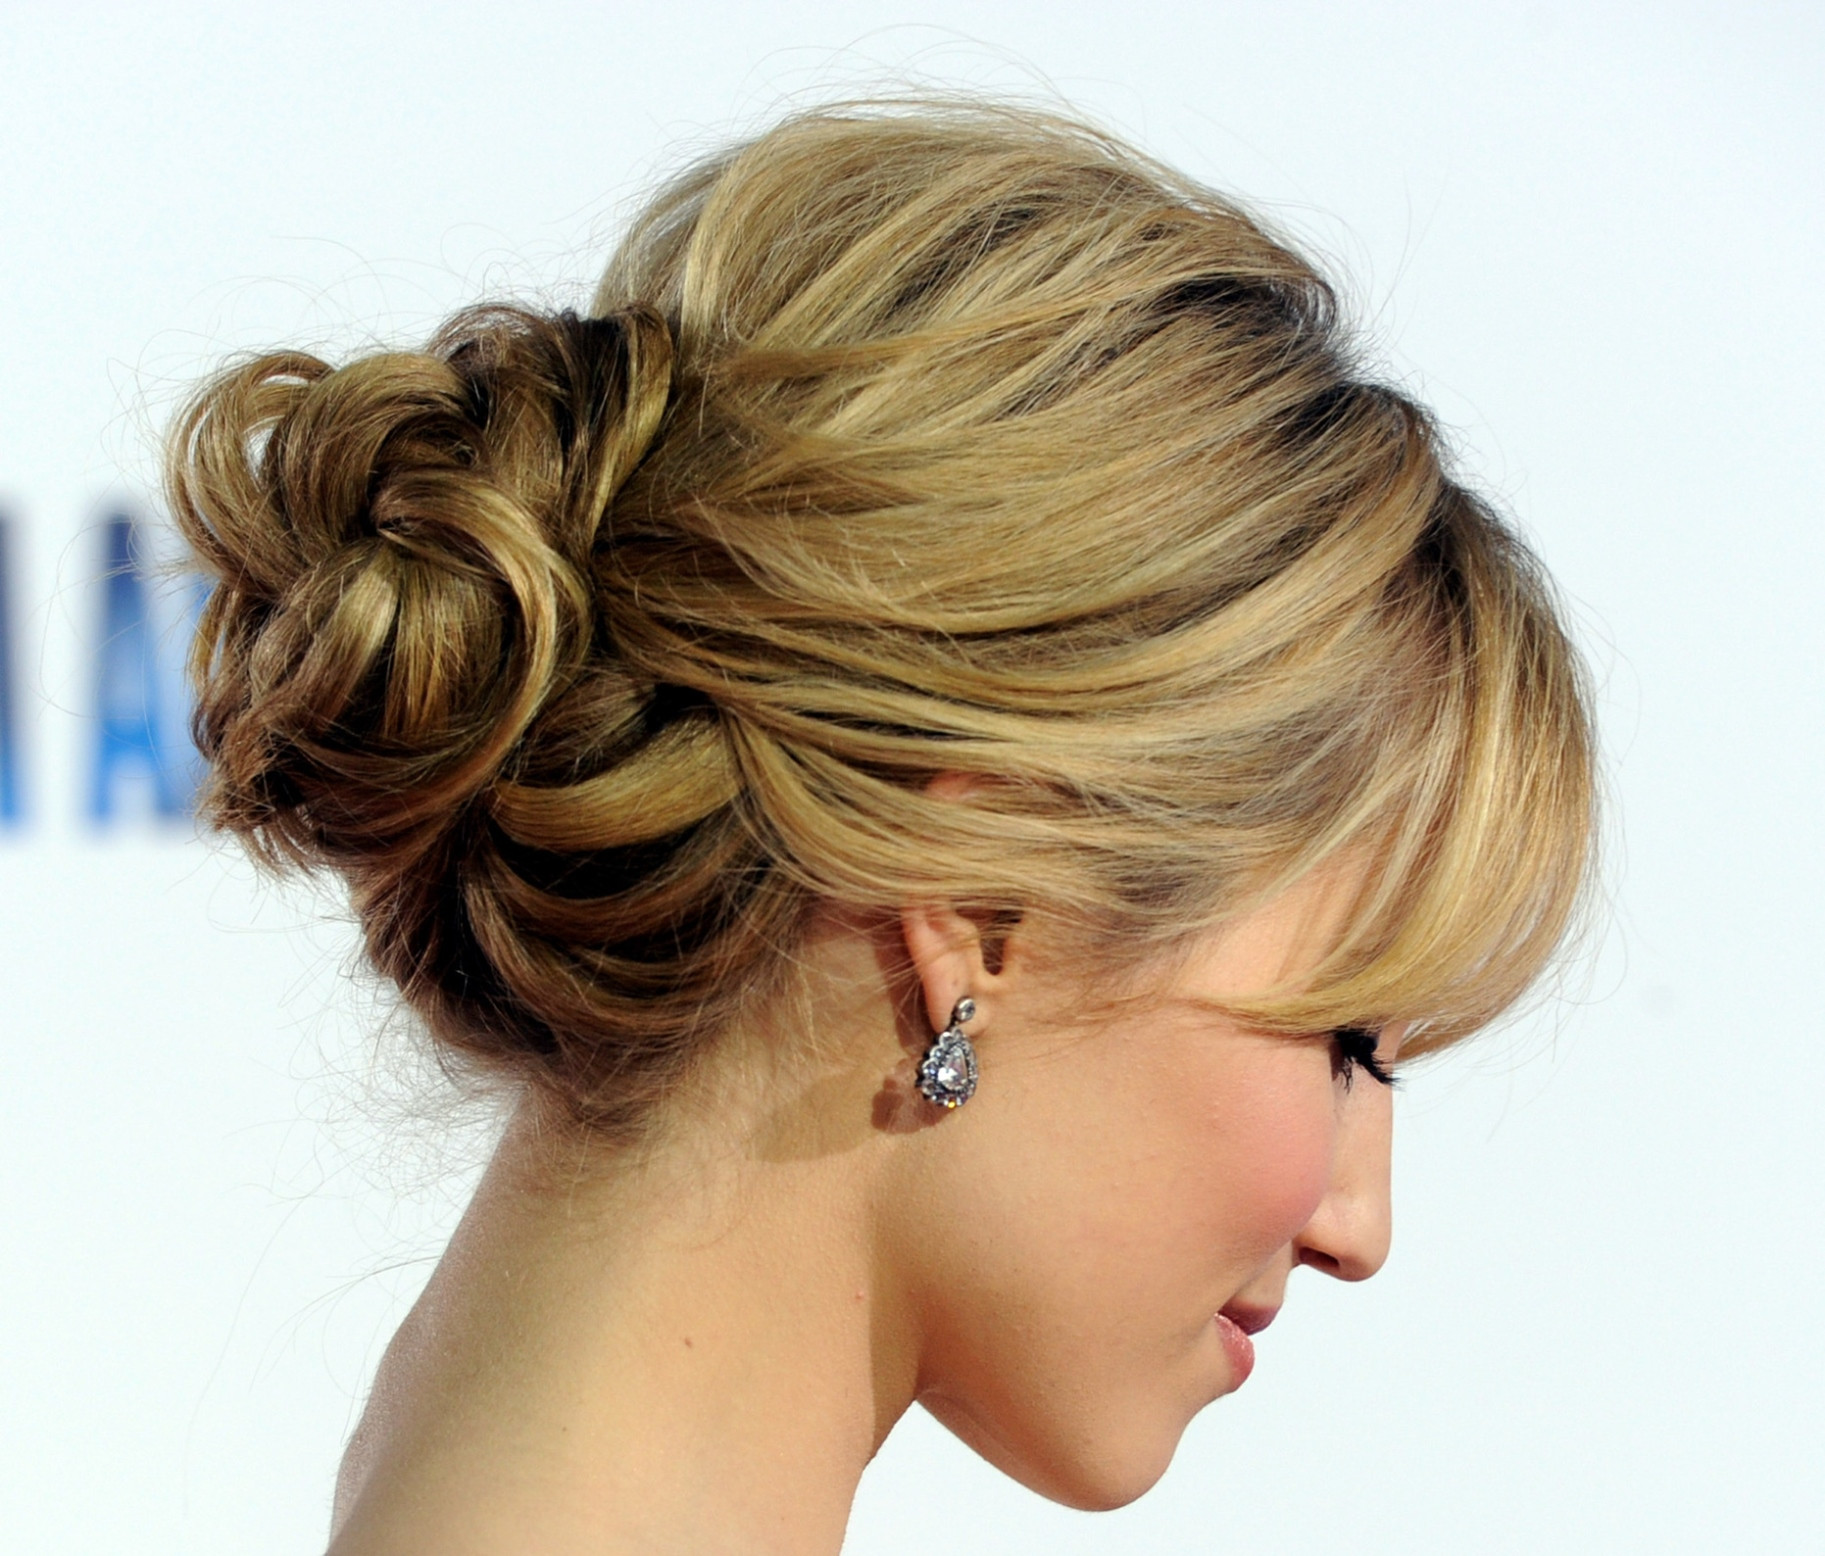 Low Bun Prom Hairstyles
 Voguish Bun Hairstyles For Prom 2019